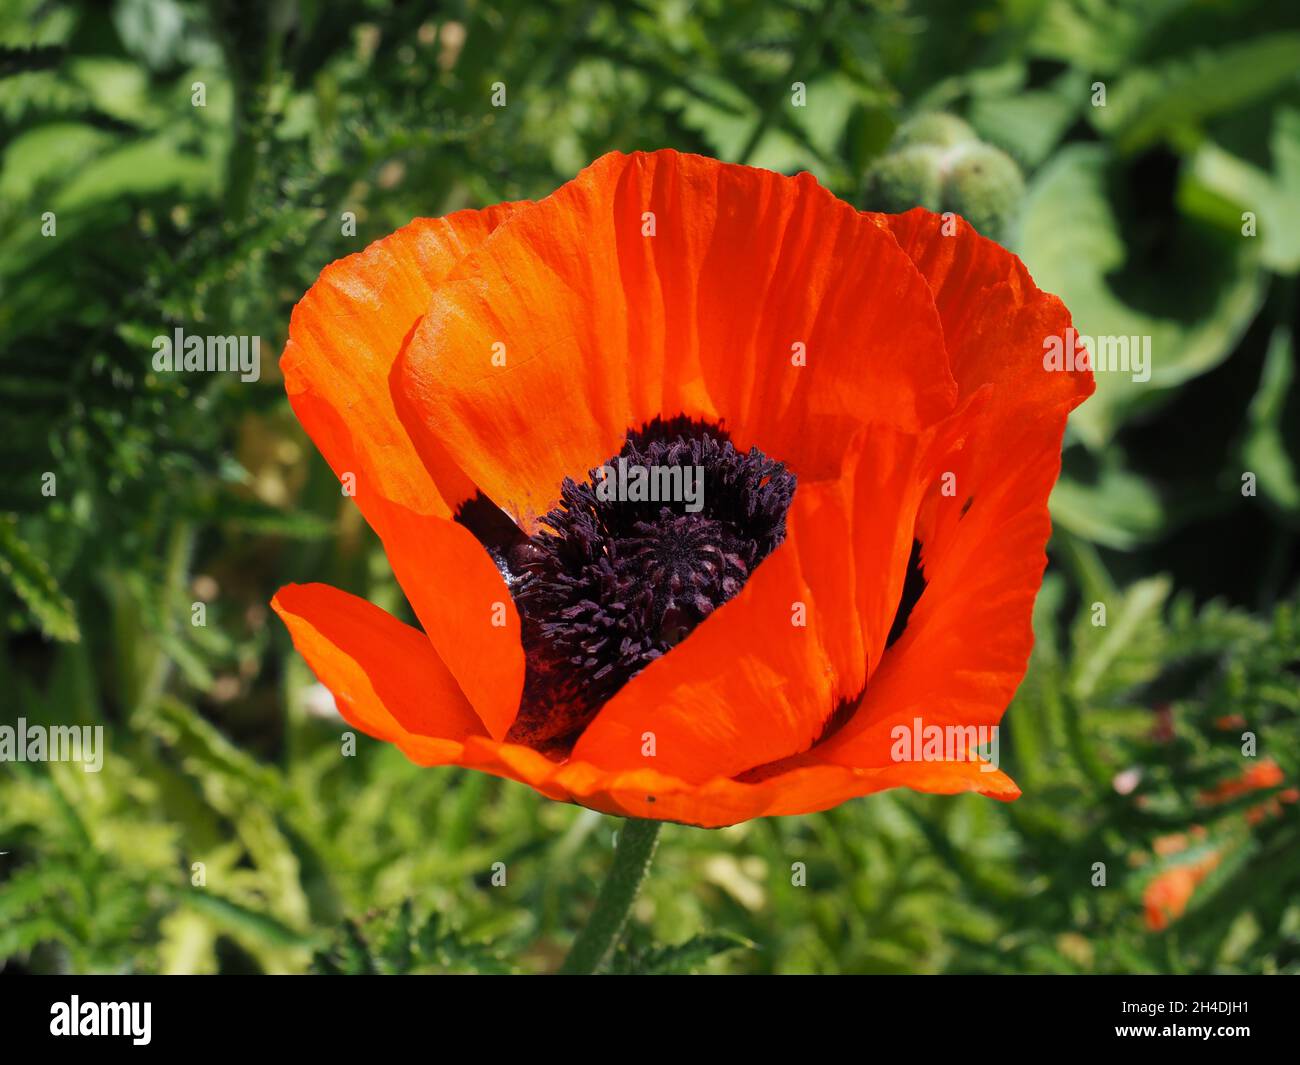 Red blossom of double Papaver orientale flower, close up. Garden Oriental poppy is herbaceous, perennial, flowering plant of the family Papaveraceae. Stock Photo